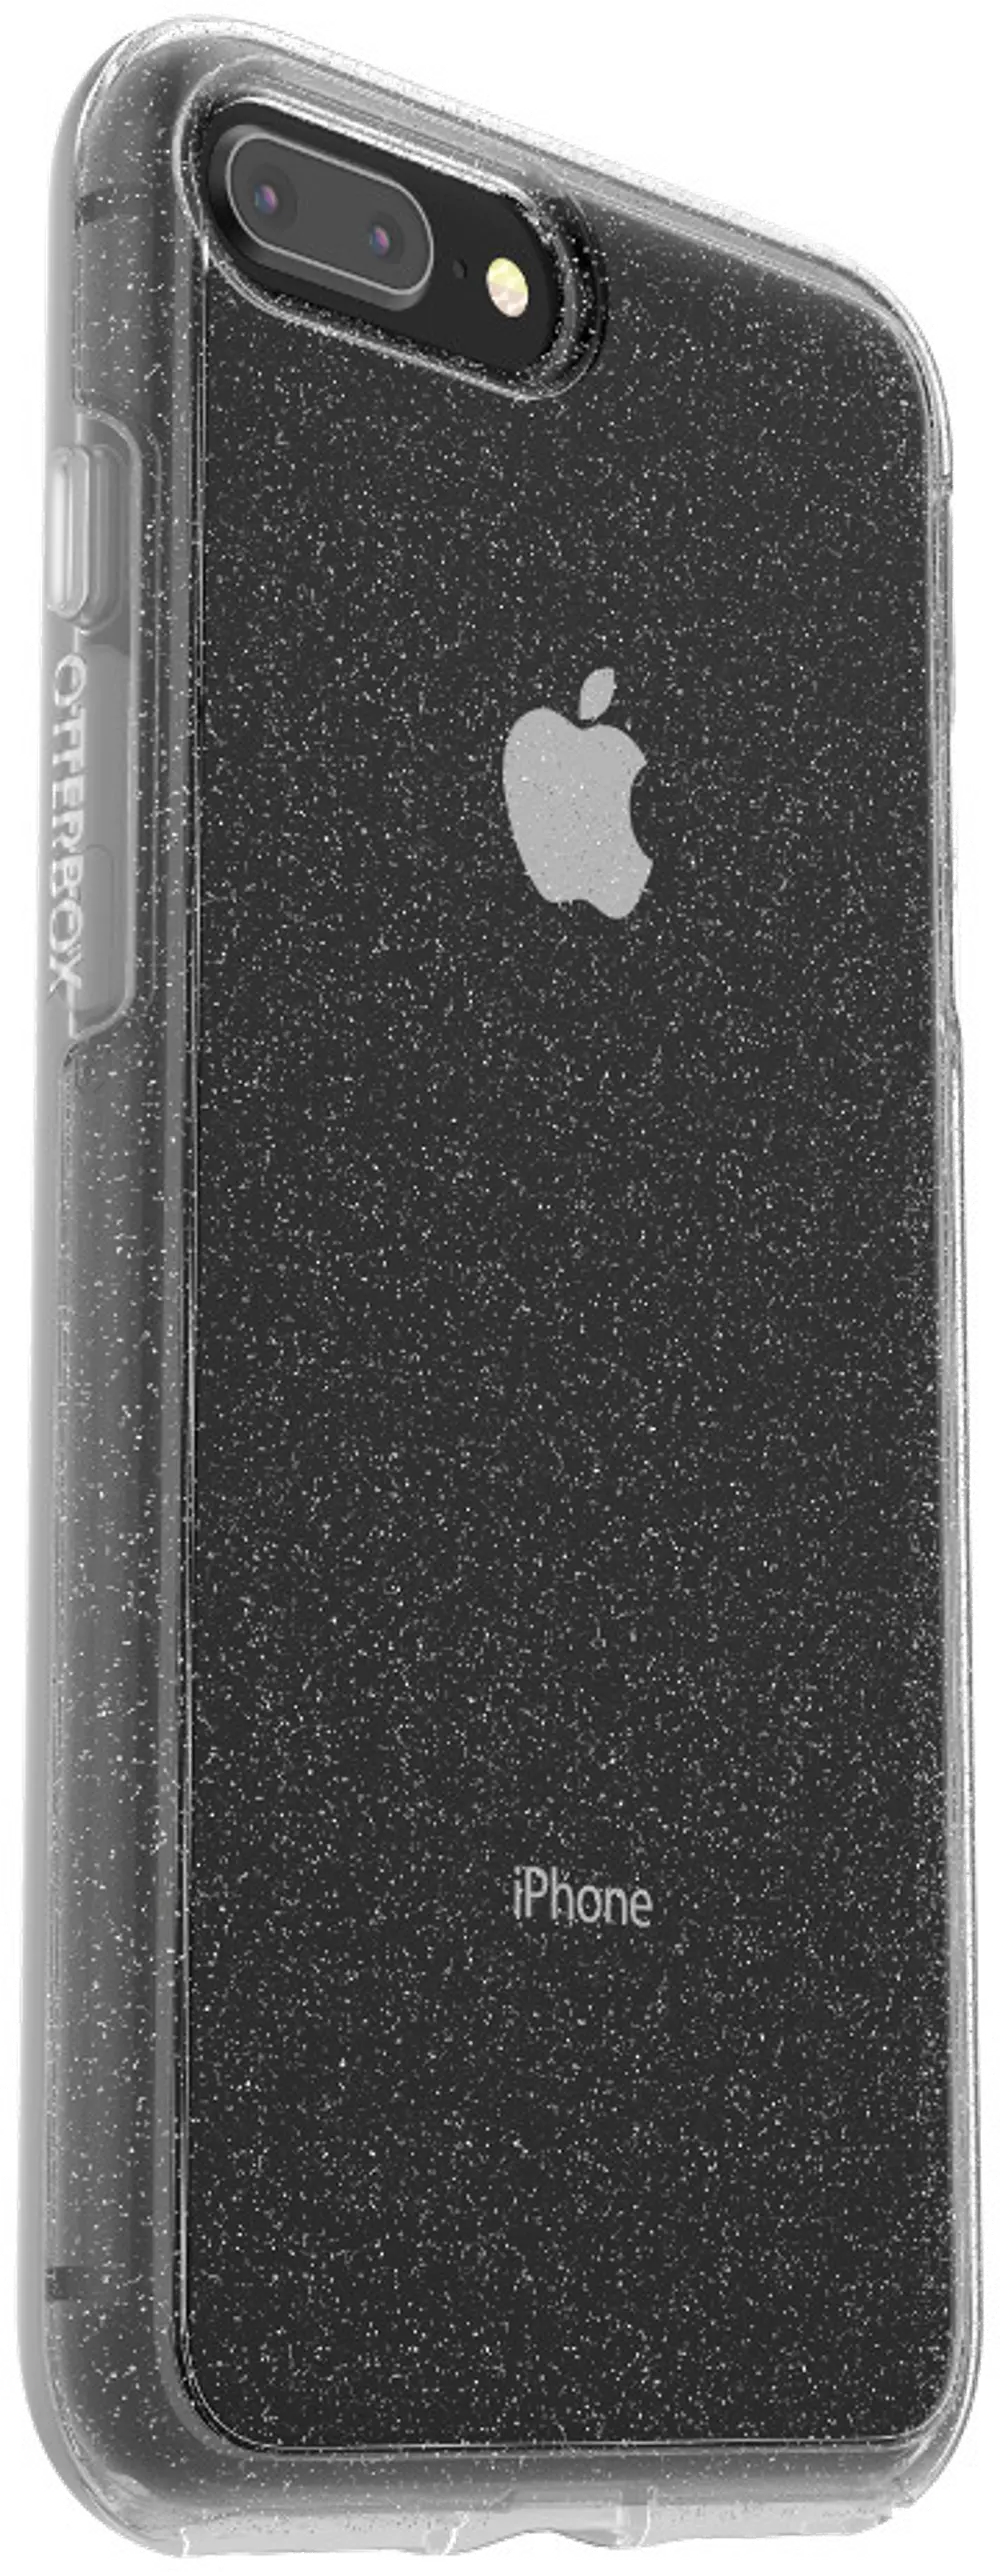 77-56917,S-IP8P-STAR OtterBox Clear Stardust iPhone 7 Plus / iPhone 8 Plus Case-1